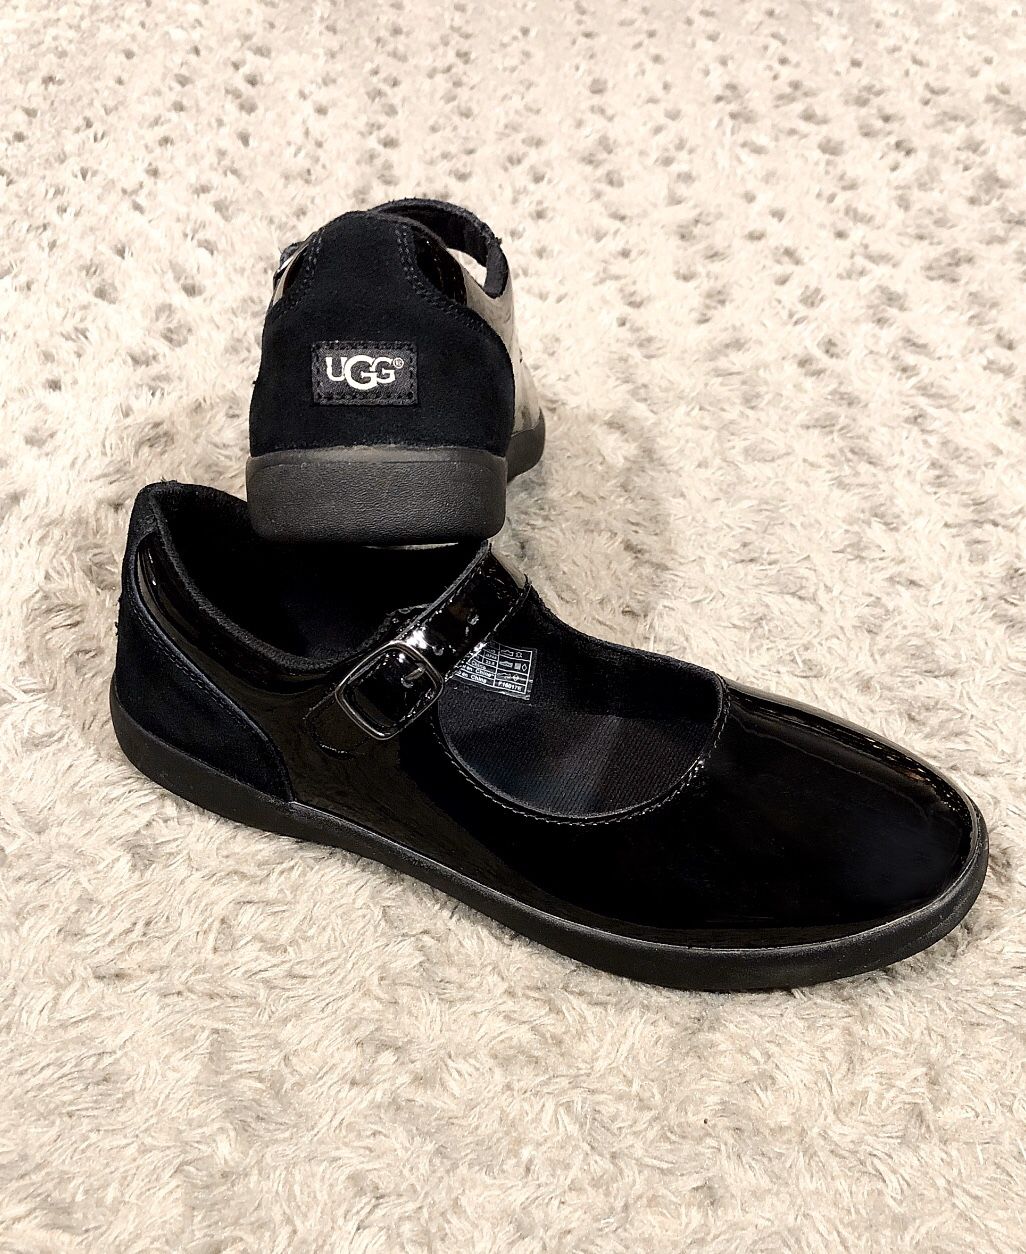 Girls UGG Mary Jane flat paid $60 size 5 like new! Great condition no issues. Liquid-shine patent leather Adjustable strap mary-jane flat, detailed w